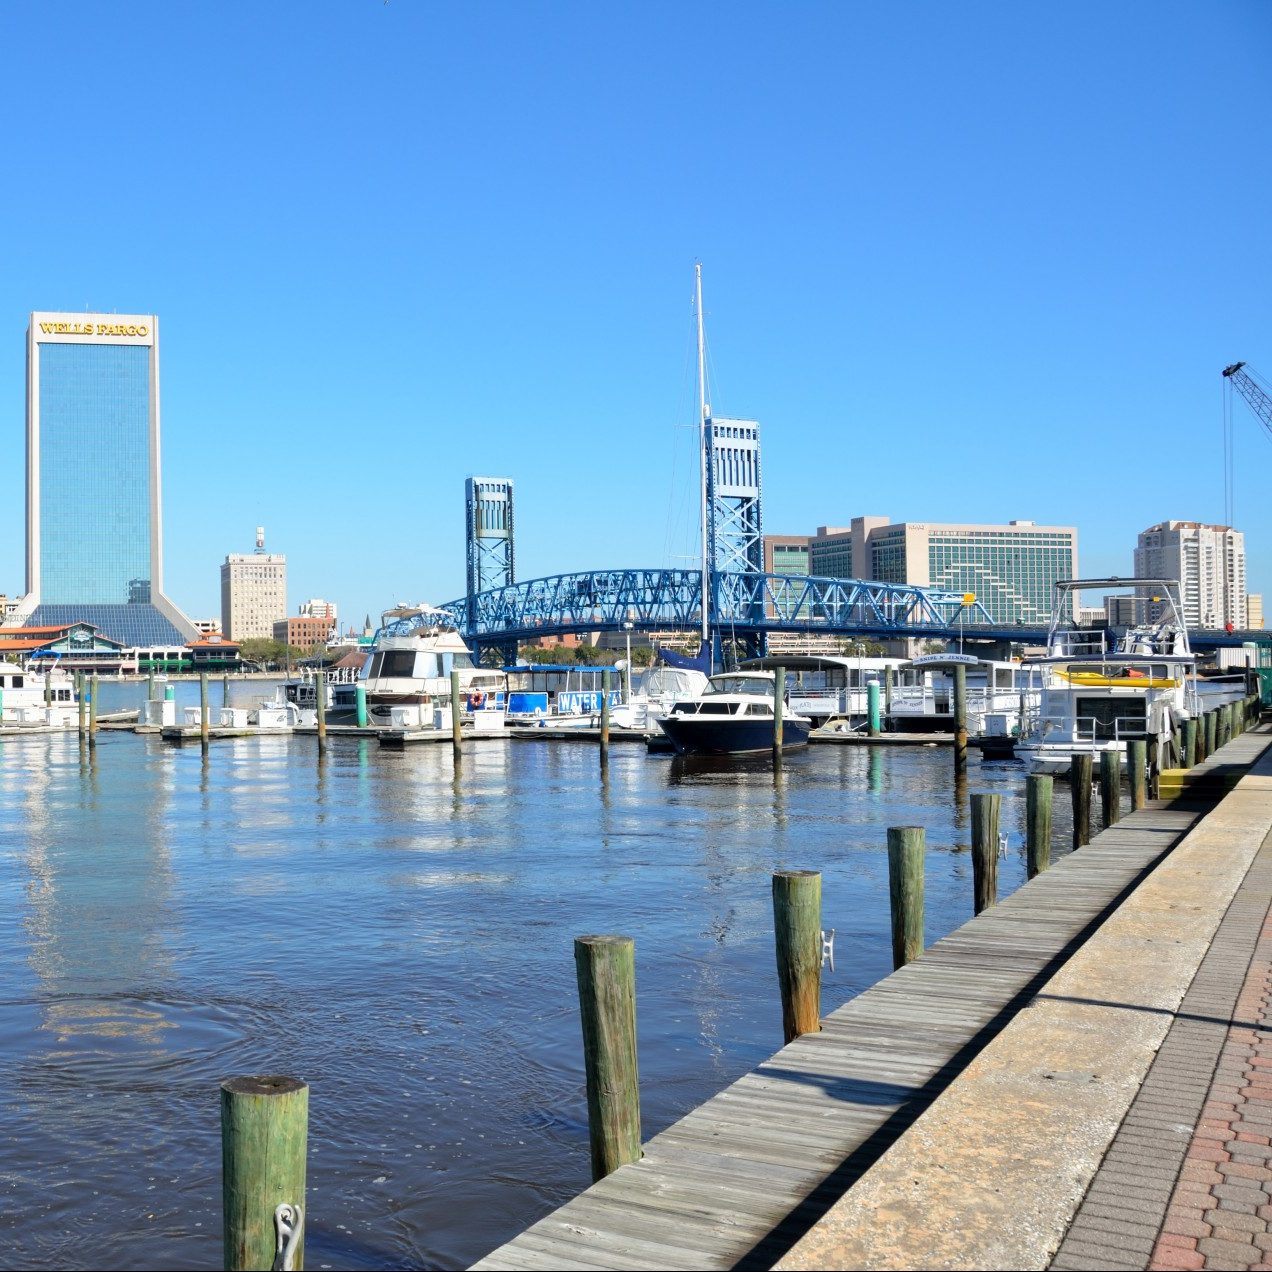 Photograph of Jacksonville, Florida harbor, boats, city skyline in background.